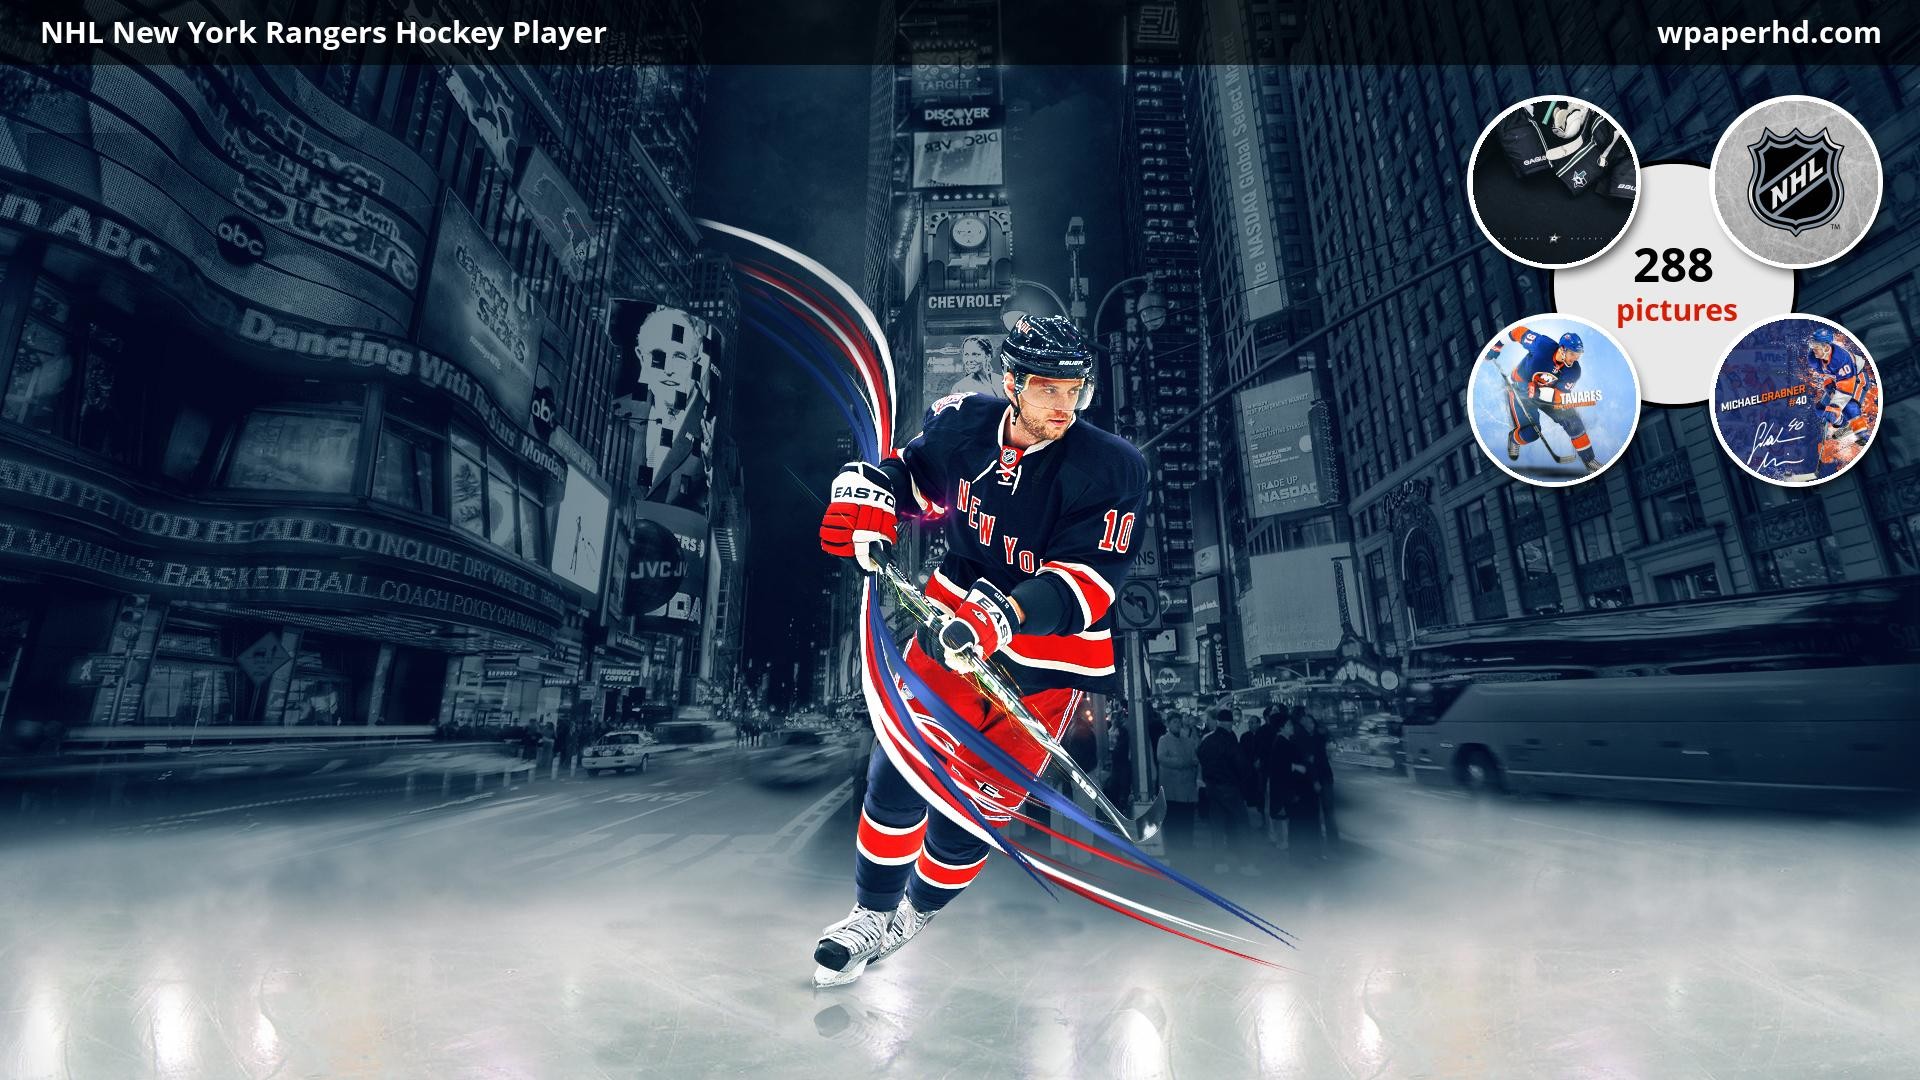 1920x1080 Description NHL New York Rangers Hockey Player wallpaper from Hockey  category. You are on page with NHL New York Rangers Hockey Player wallpaper  ...